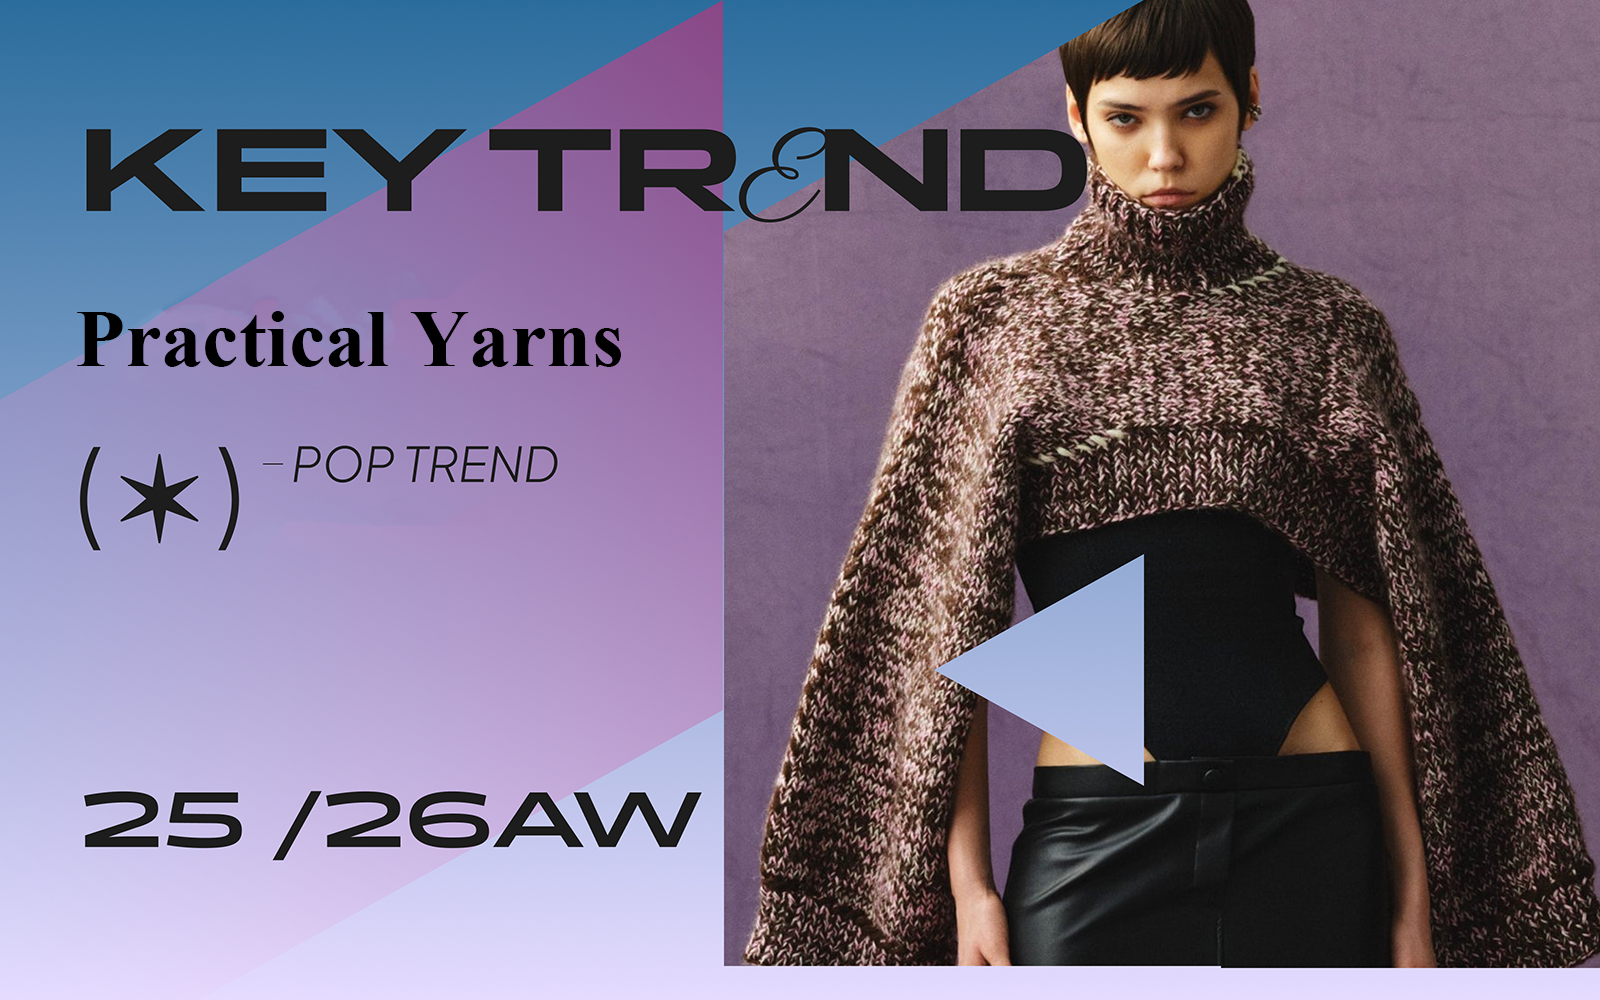 25/26AW -- The Practical Yarn Trend for Knitwear